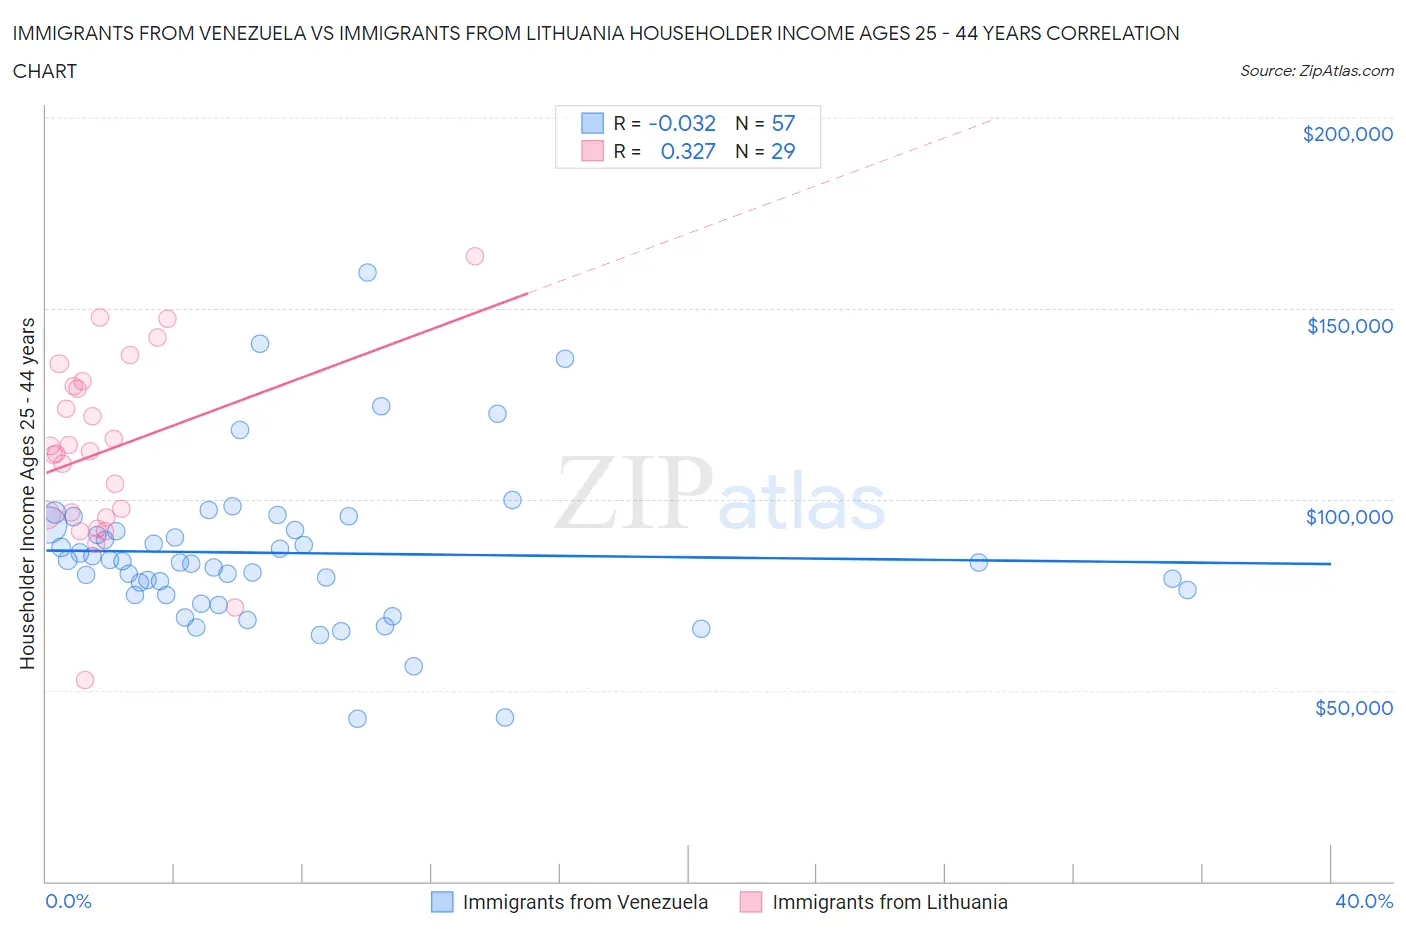 Immigrants from Venezuela vs Immigrants from Lithuania Householder Income Ages 25 - 44 years